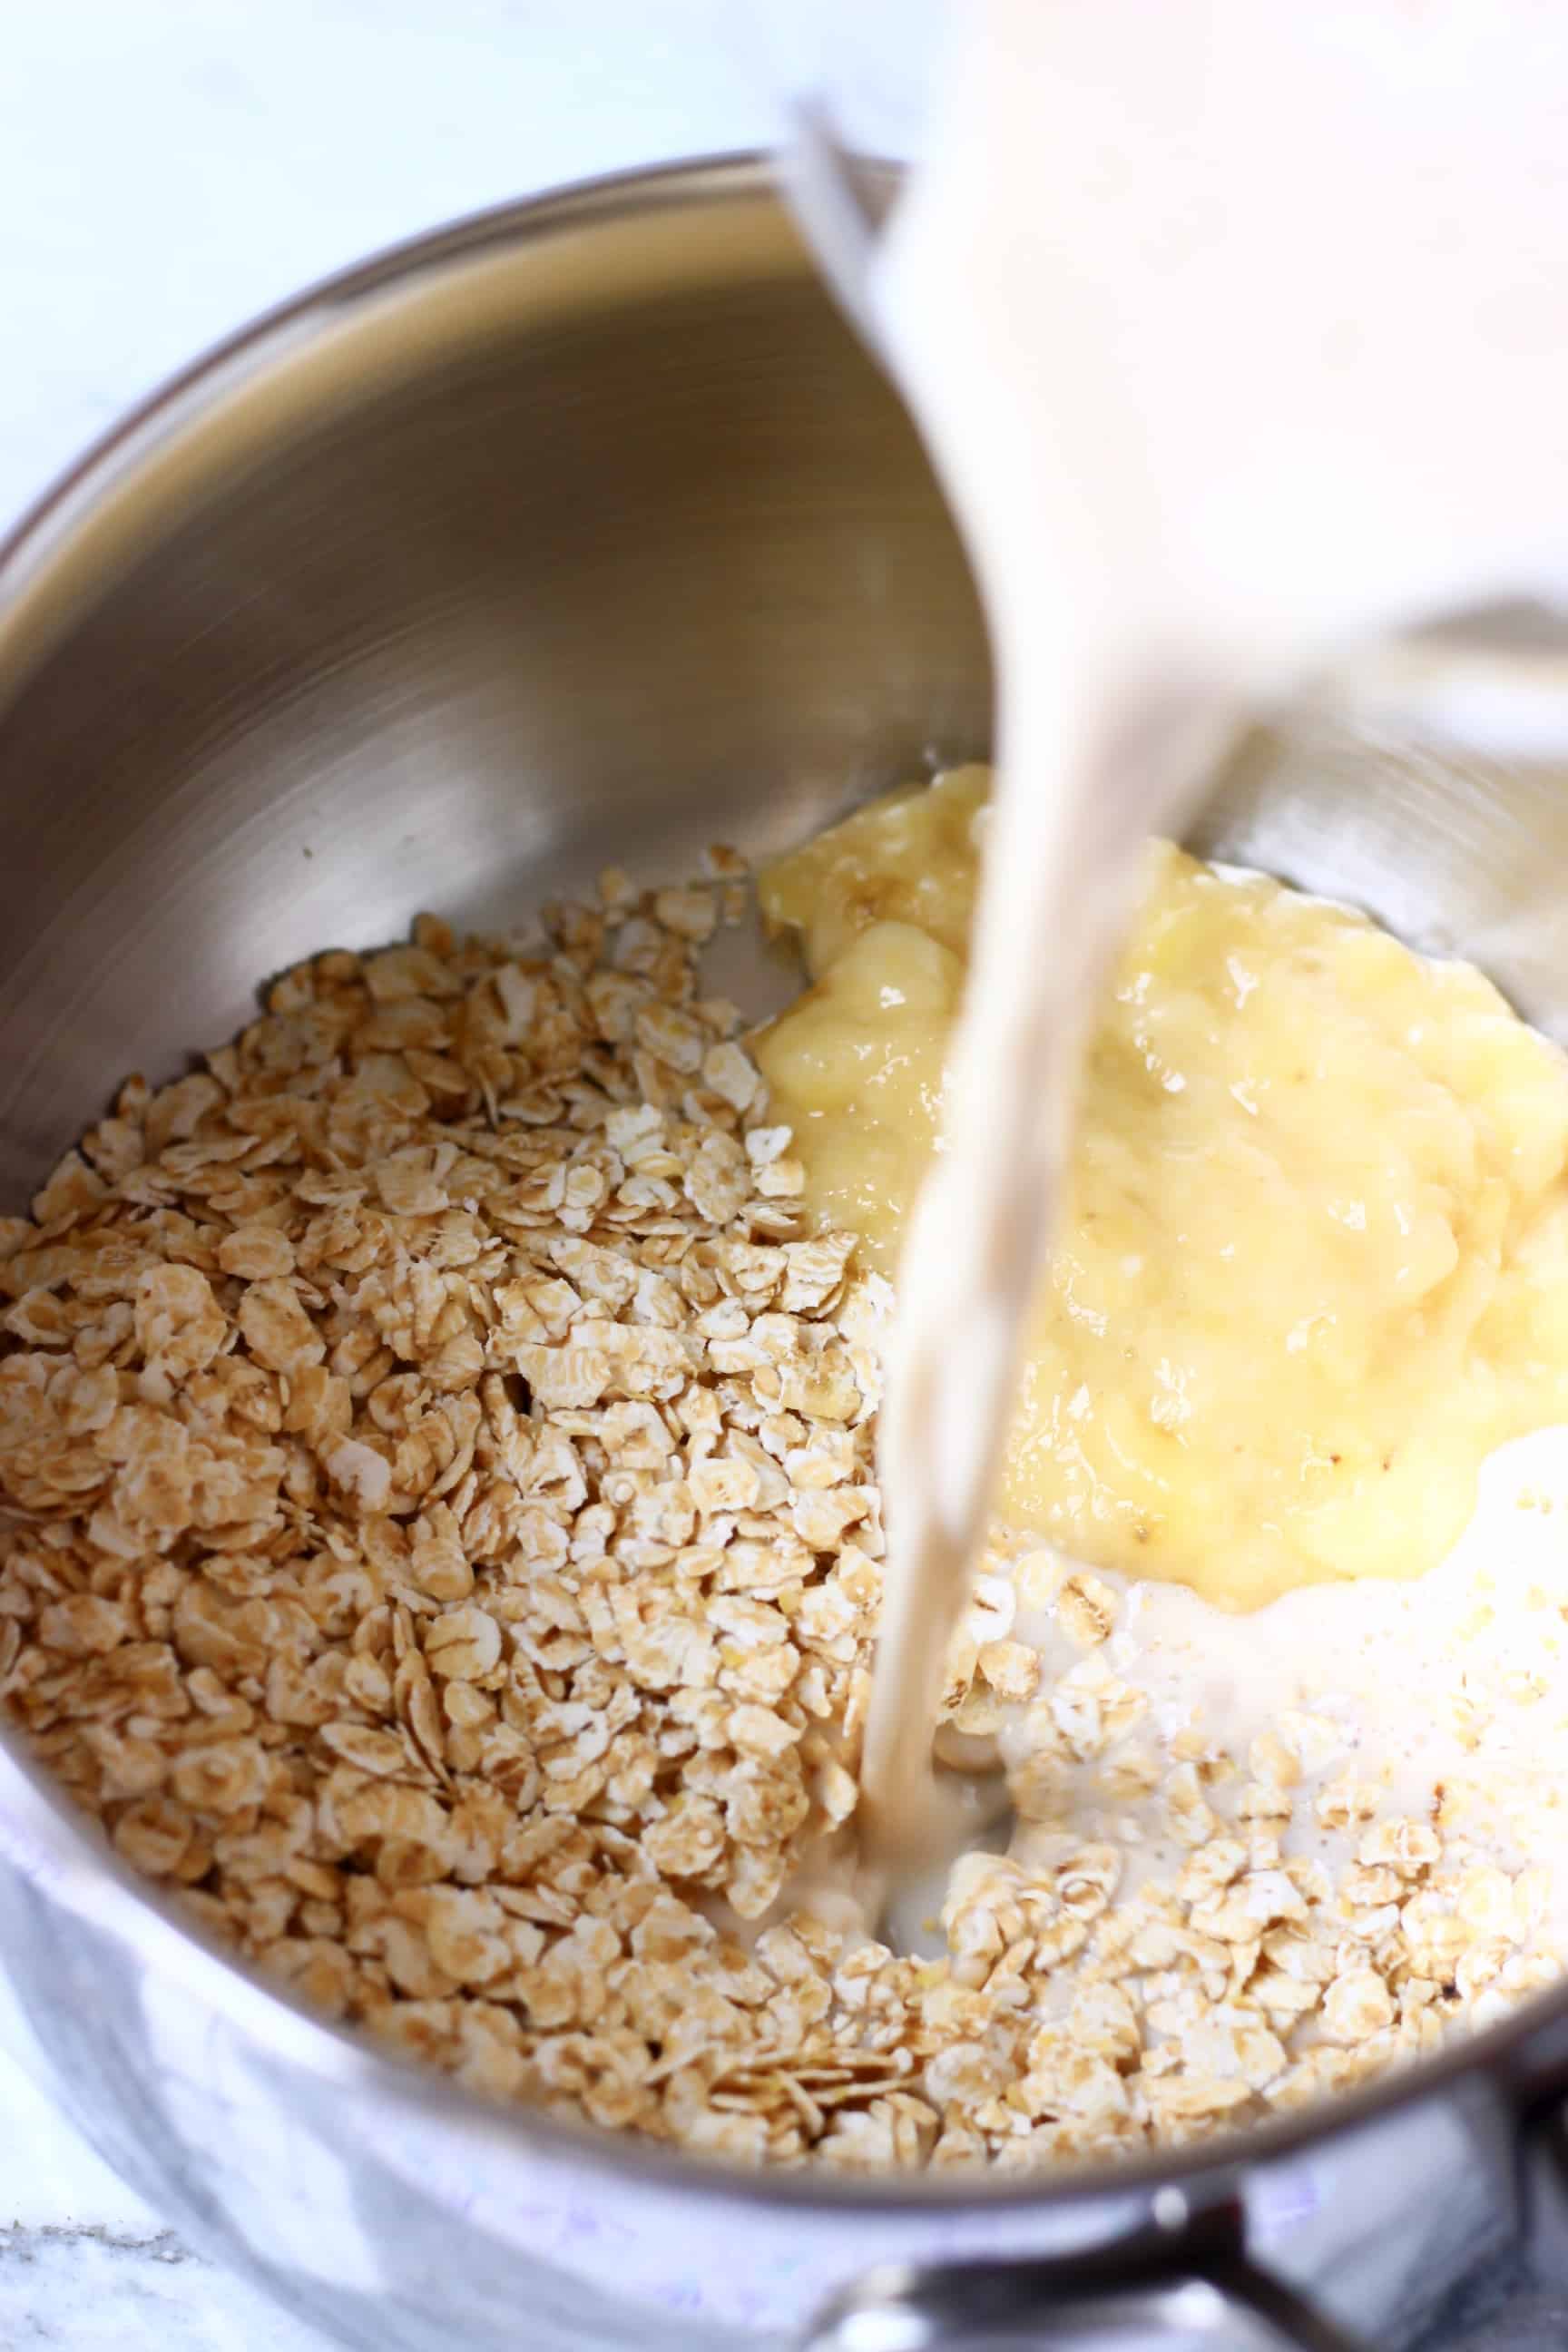 Mashed banana and oats in a pan with plant-based milk being poured into it from a jug